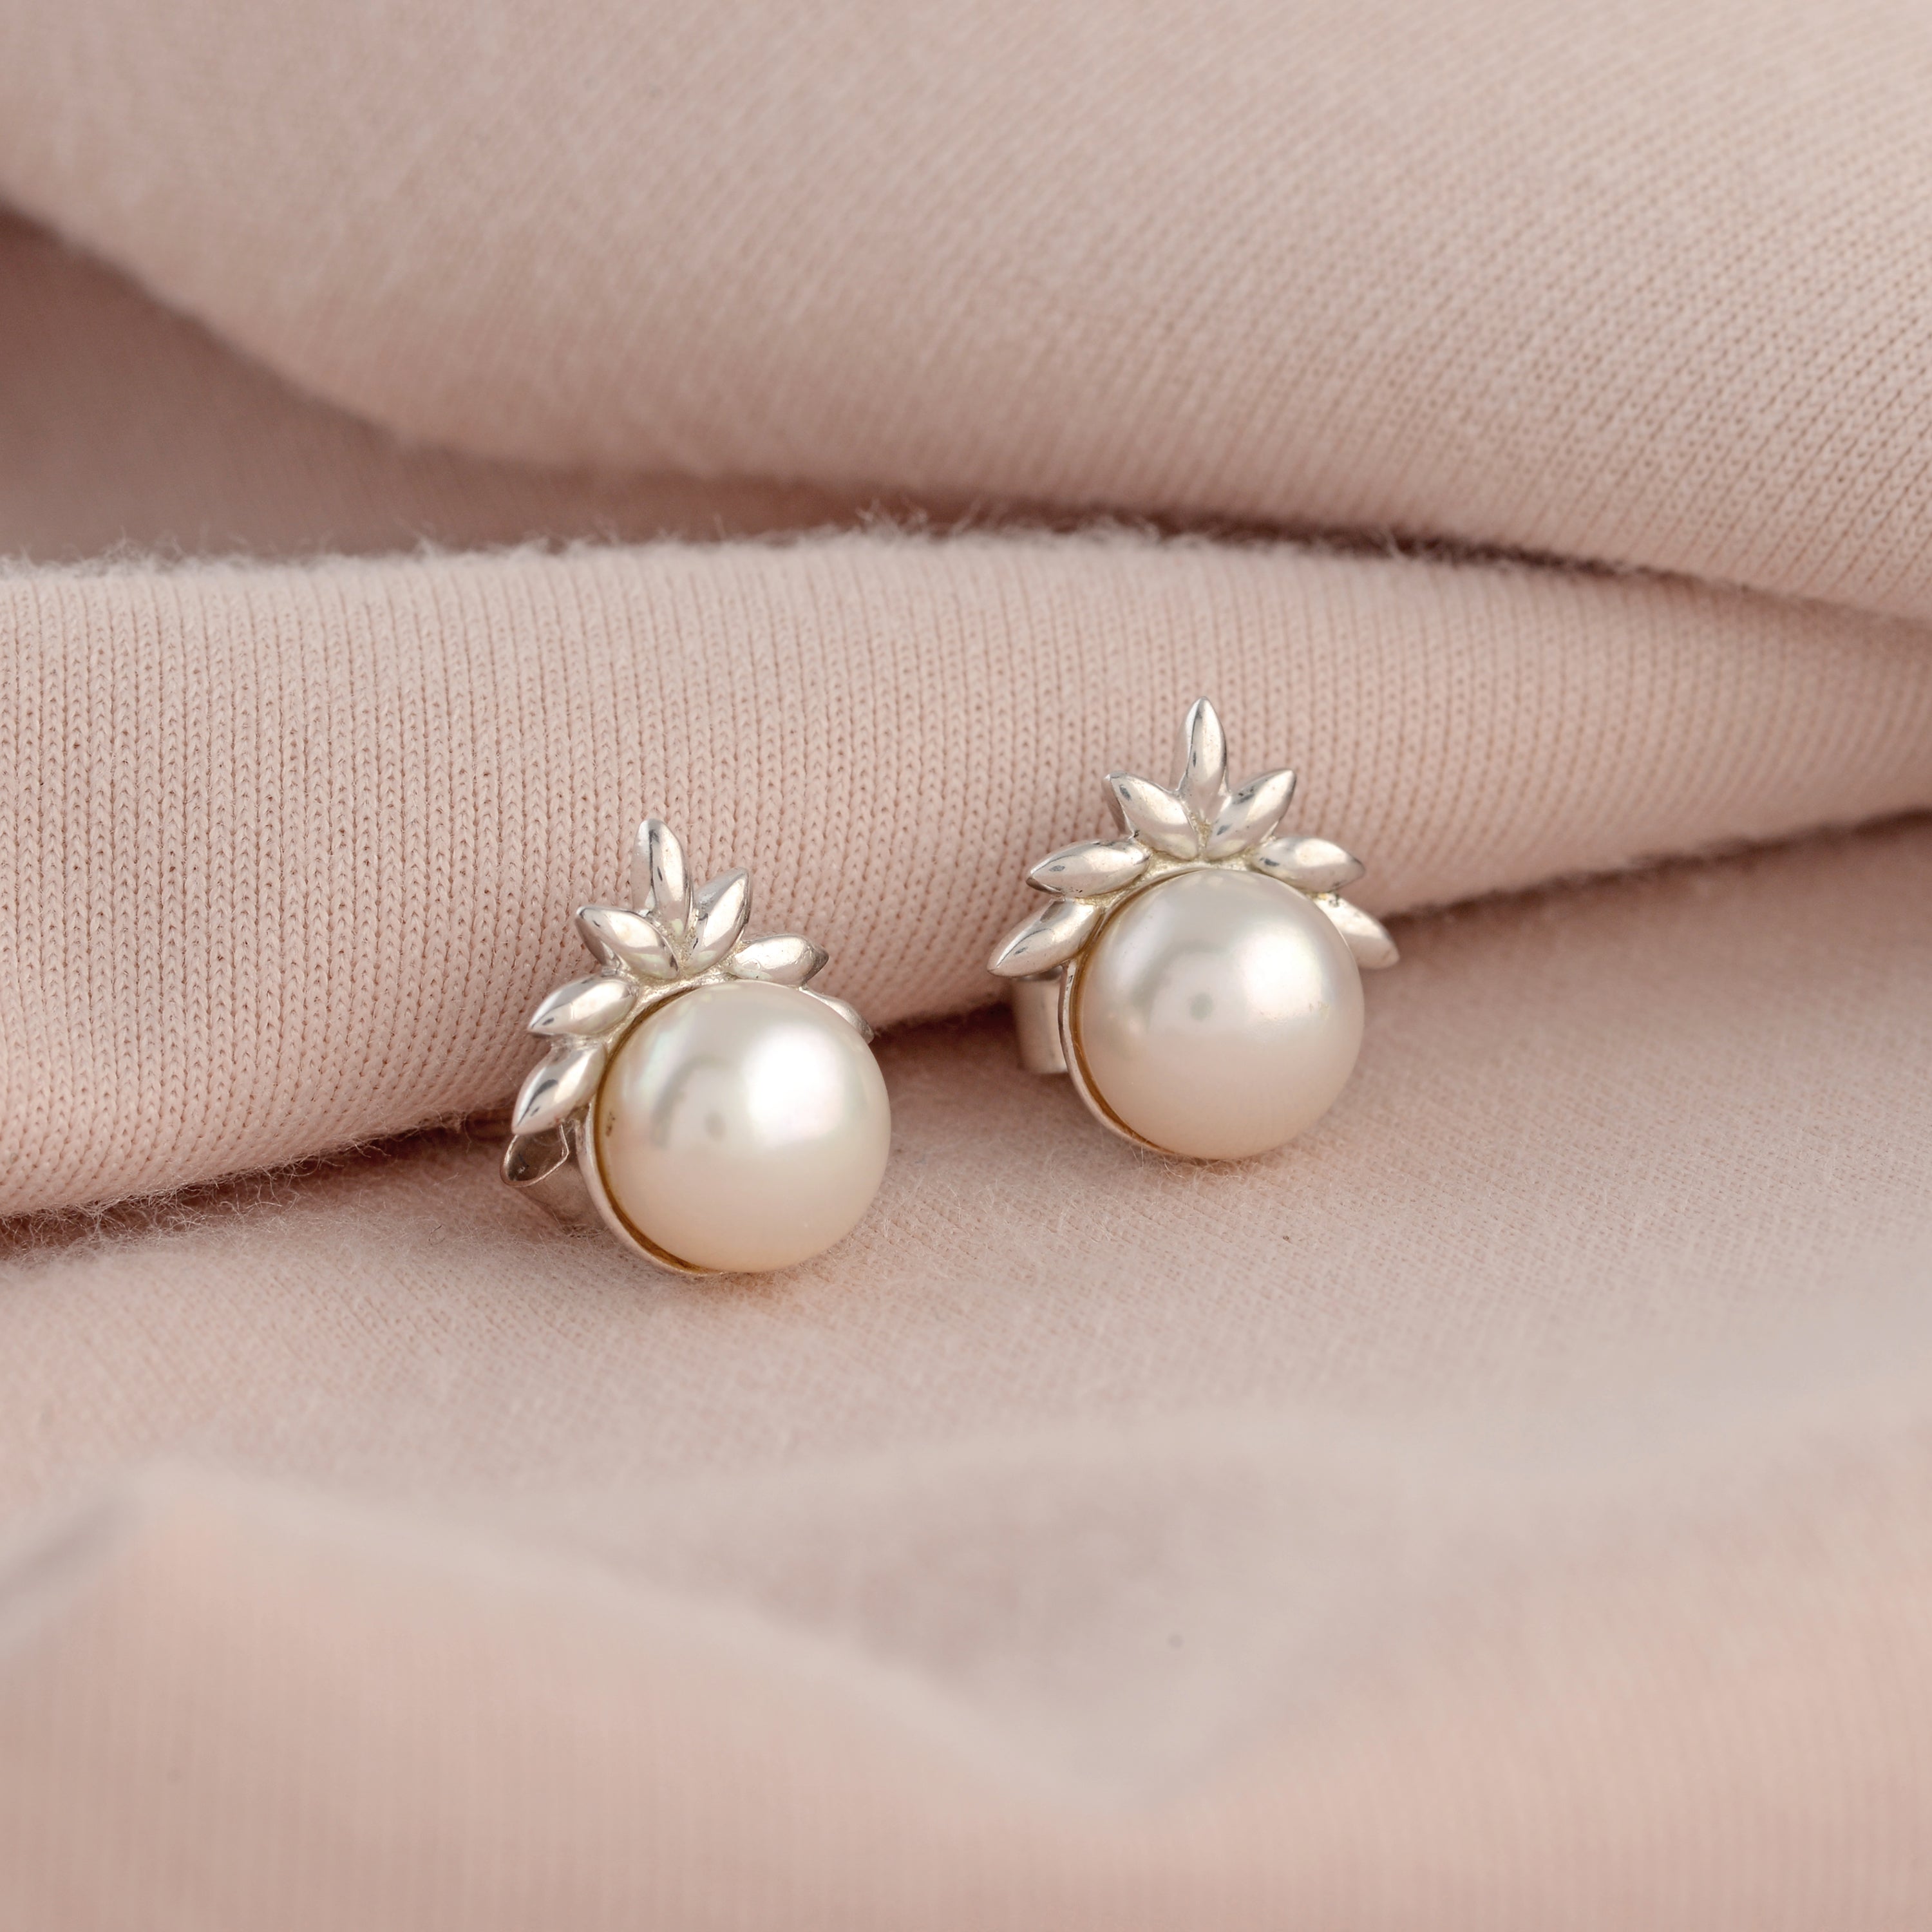 Sparkling Button Pearls Adorned With AAA CZ Stones